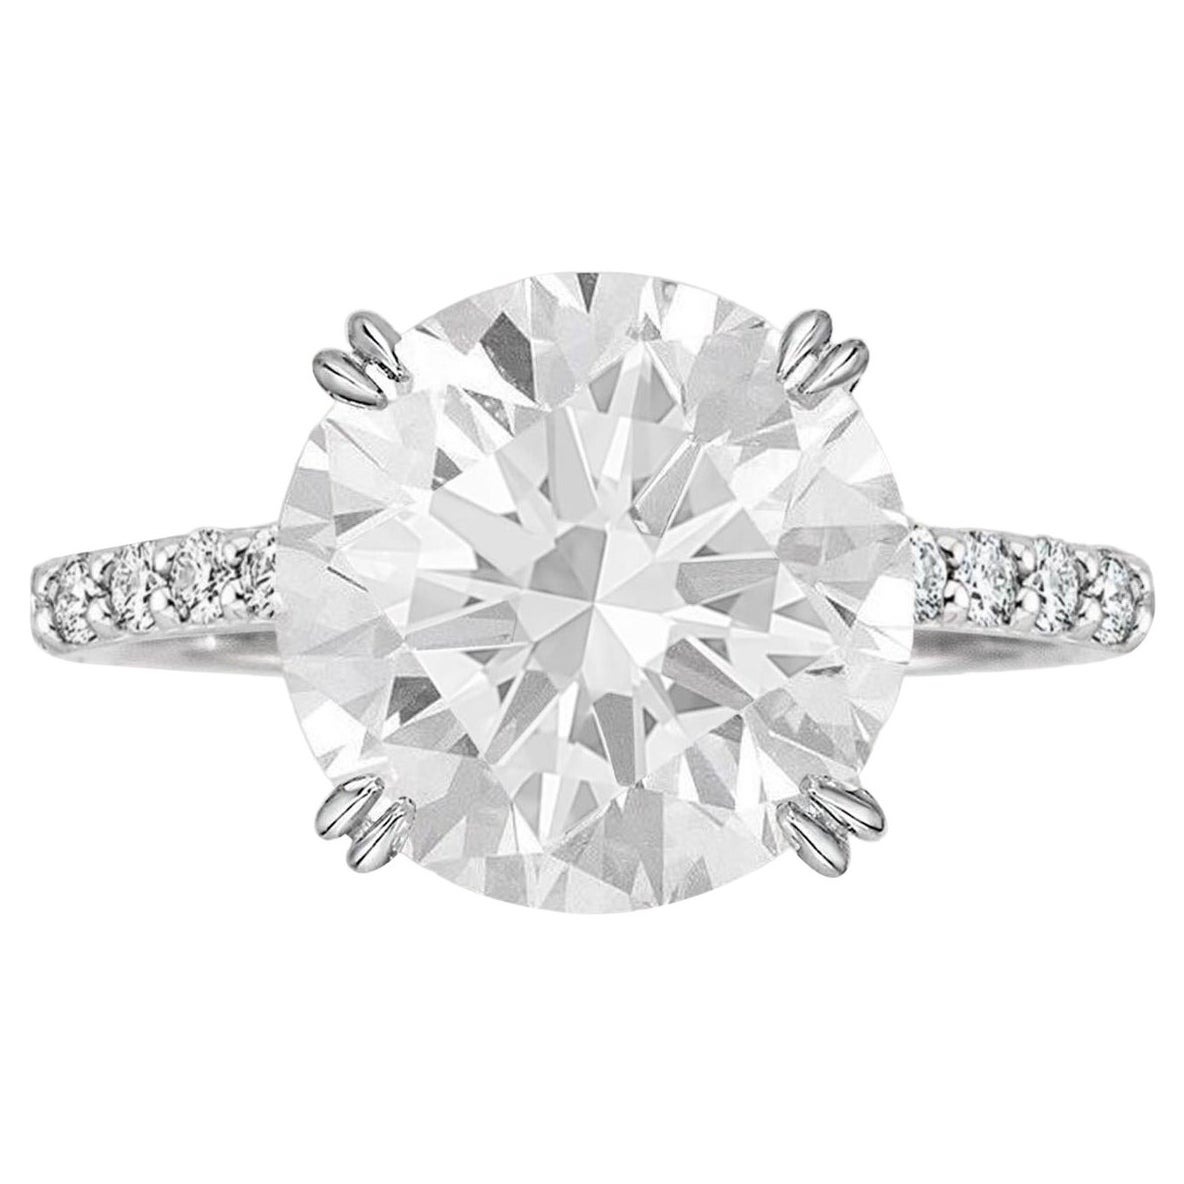 Exceptional GIA Certified 3 Carat Round Brilliant Cut Diamond Ring 